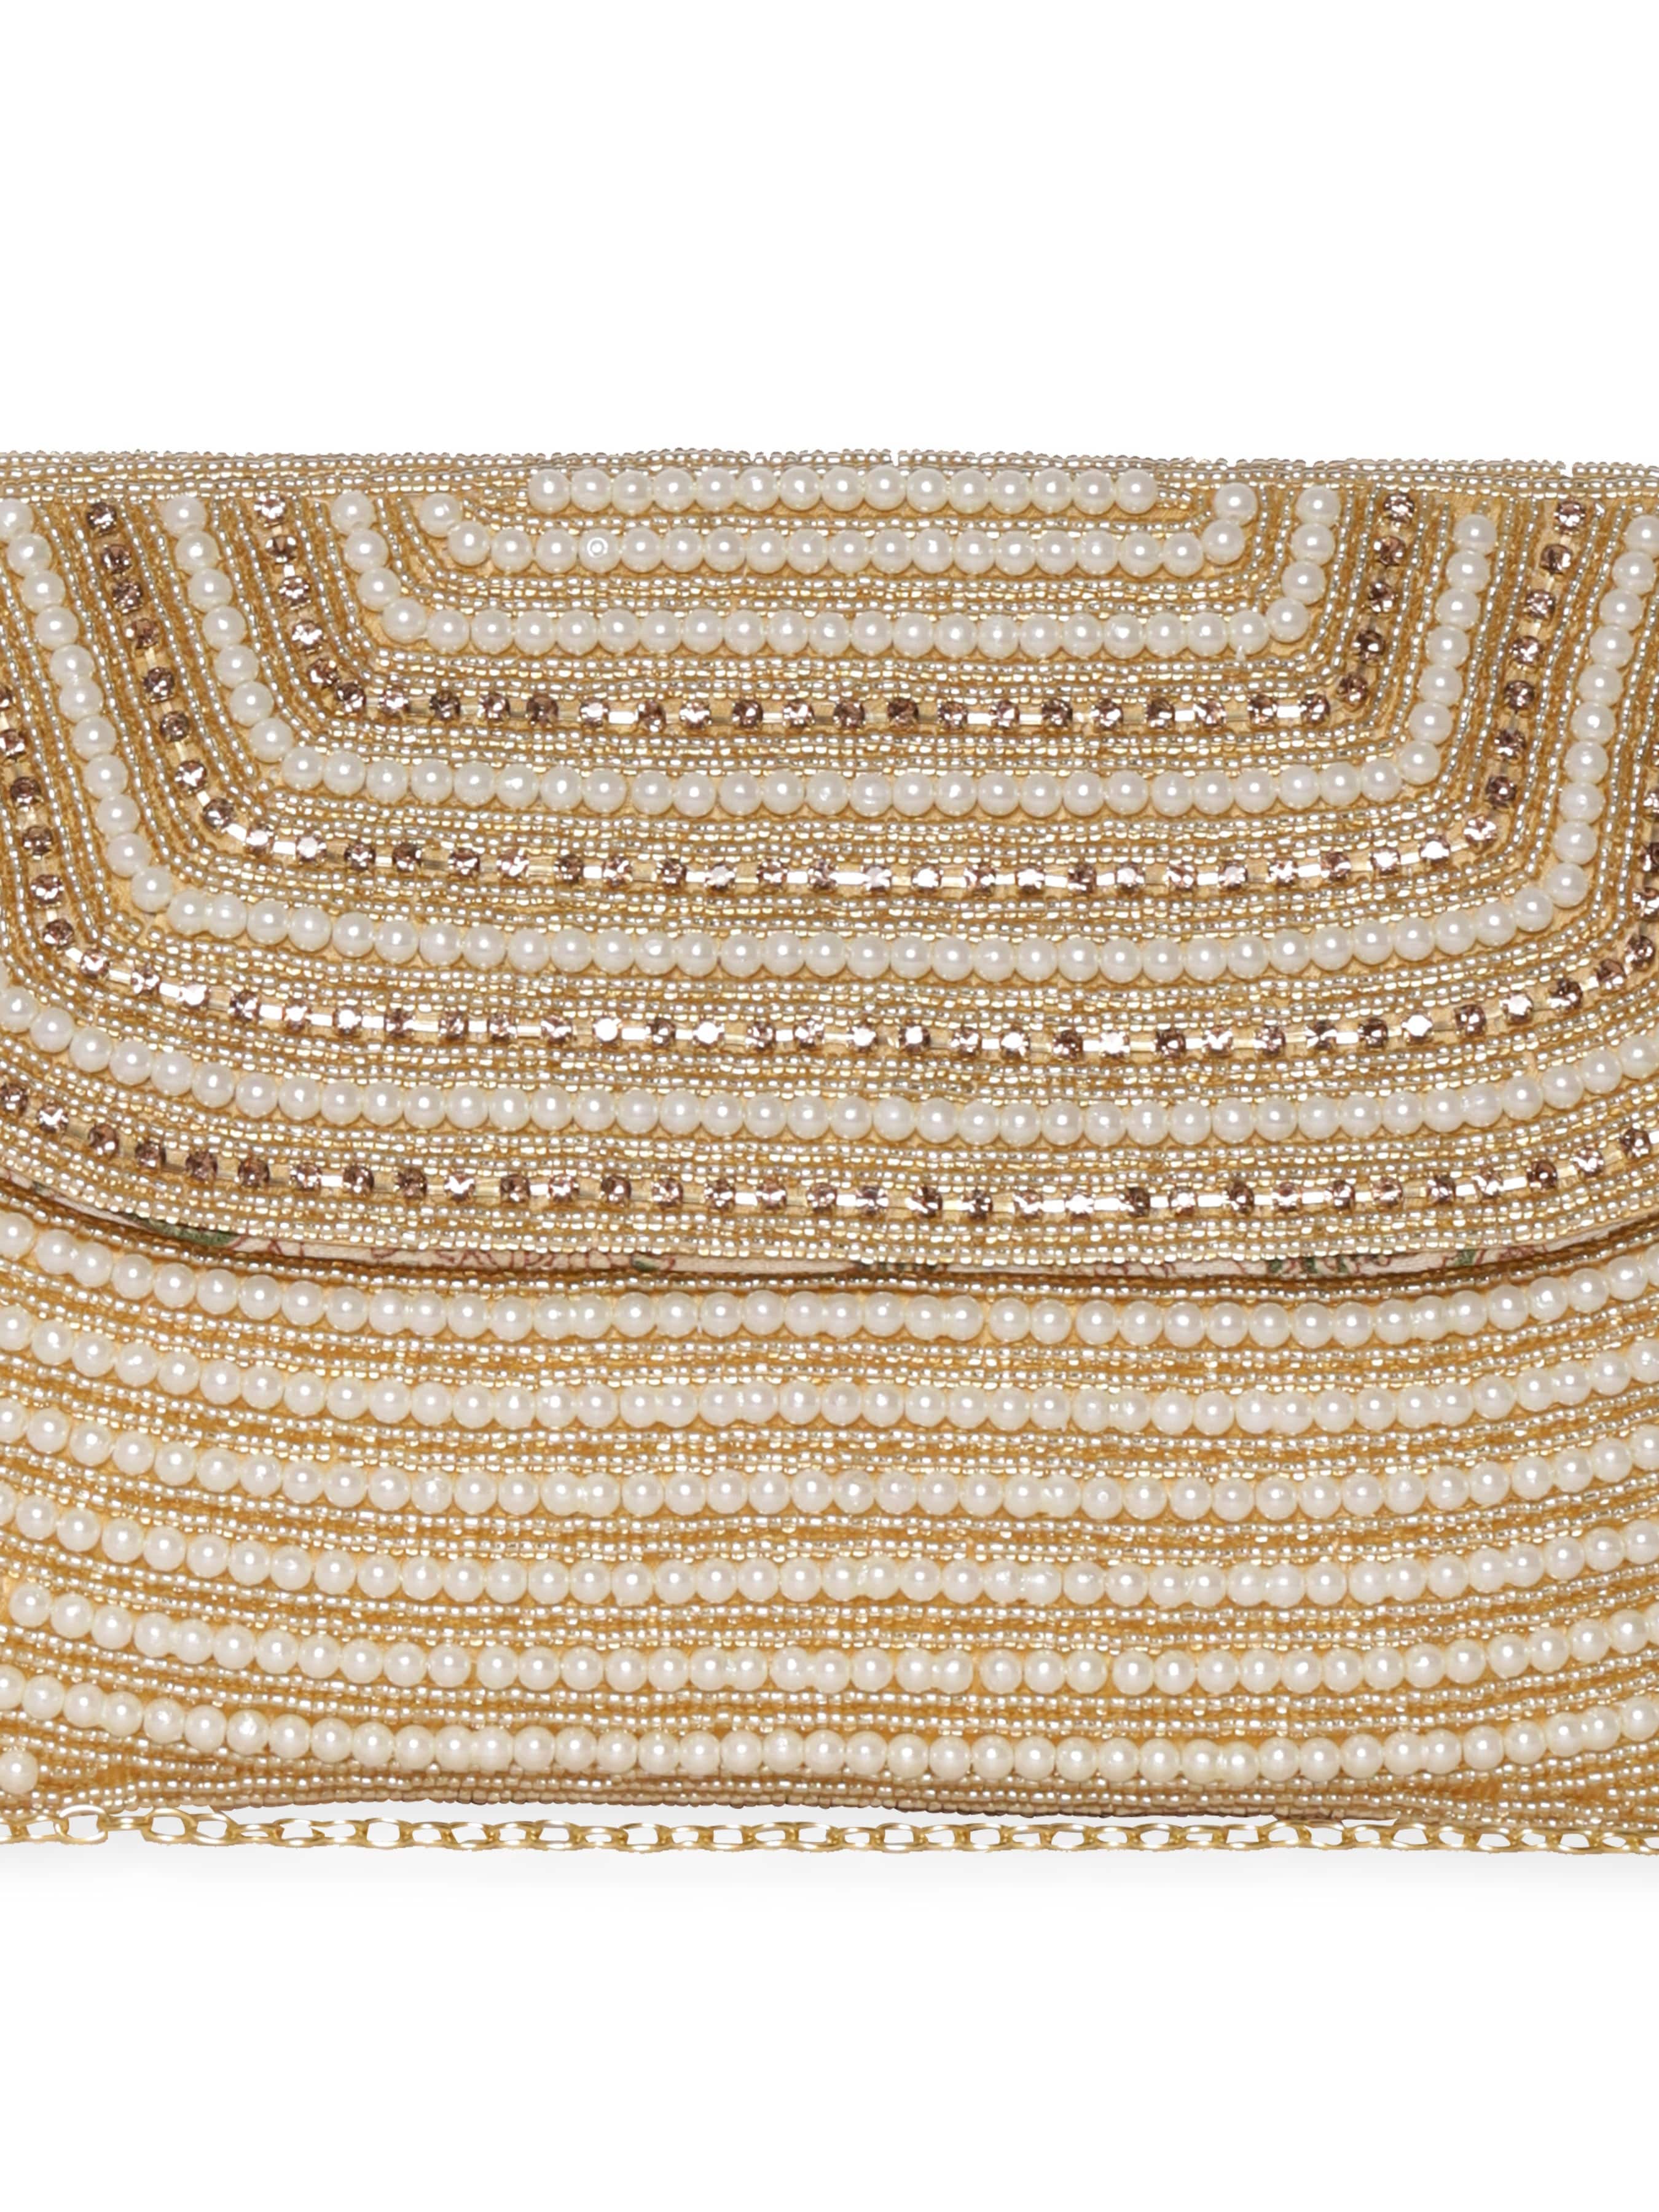 Rubans Clutch Embellished with Pearls and Stones Handbag, Wallet Accessories &amp; Clutches